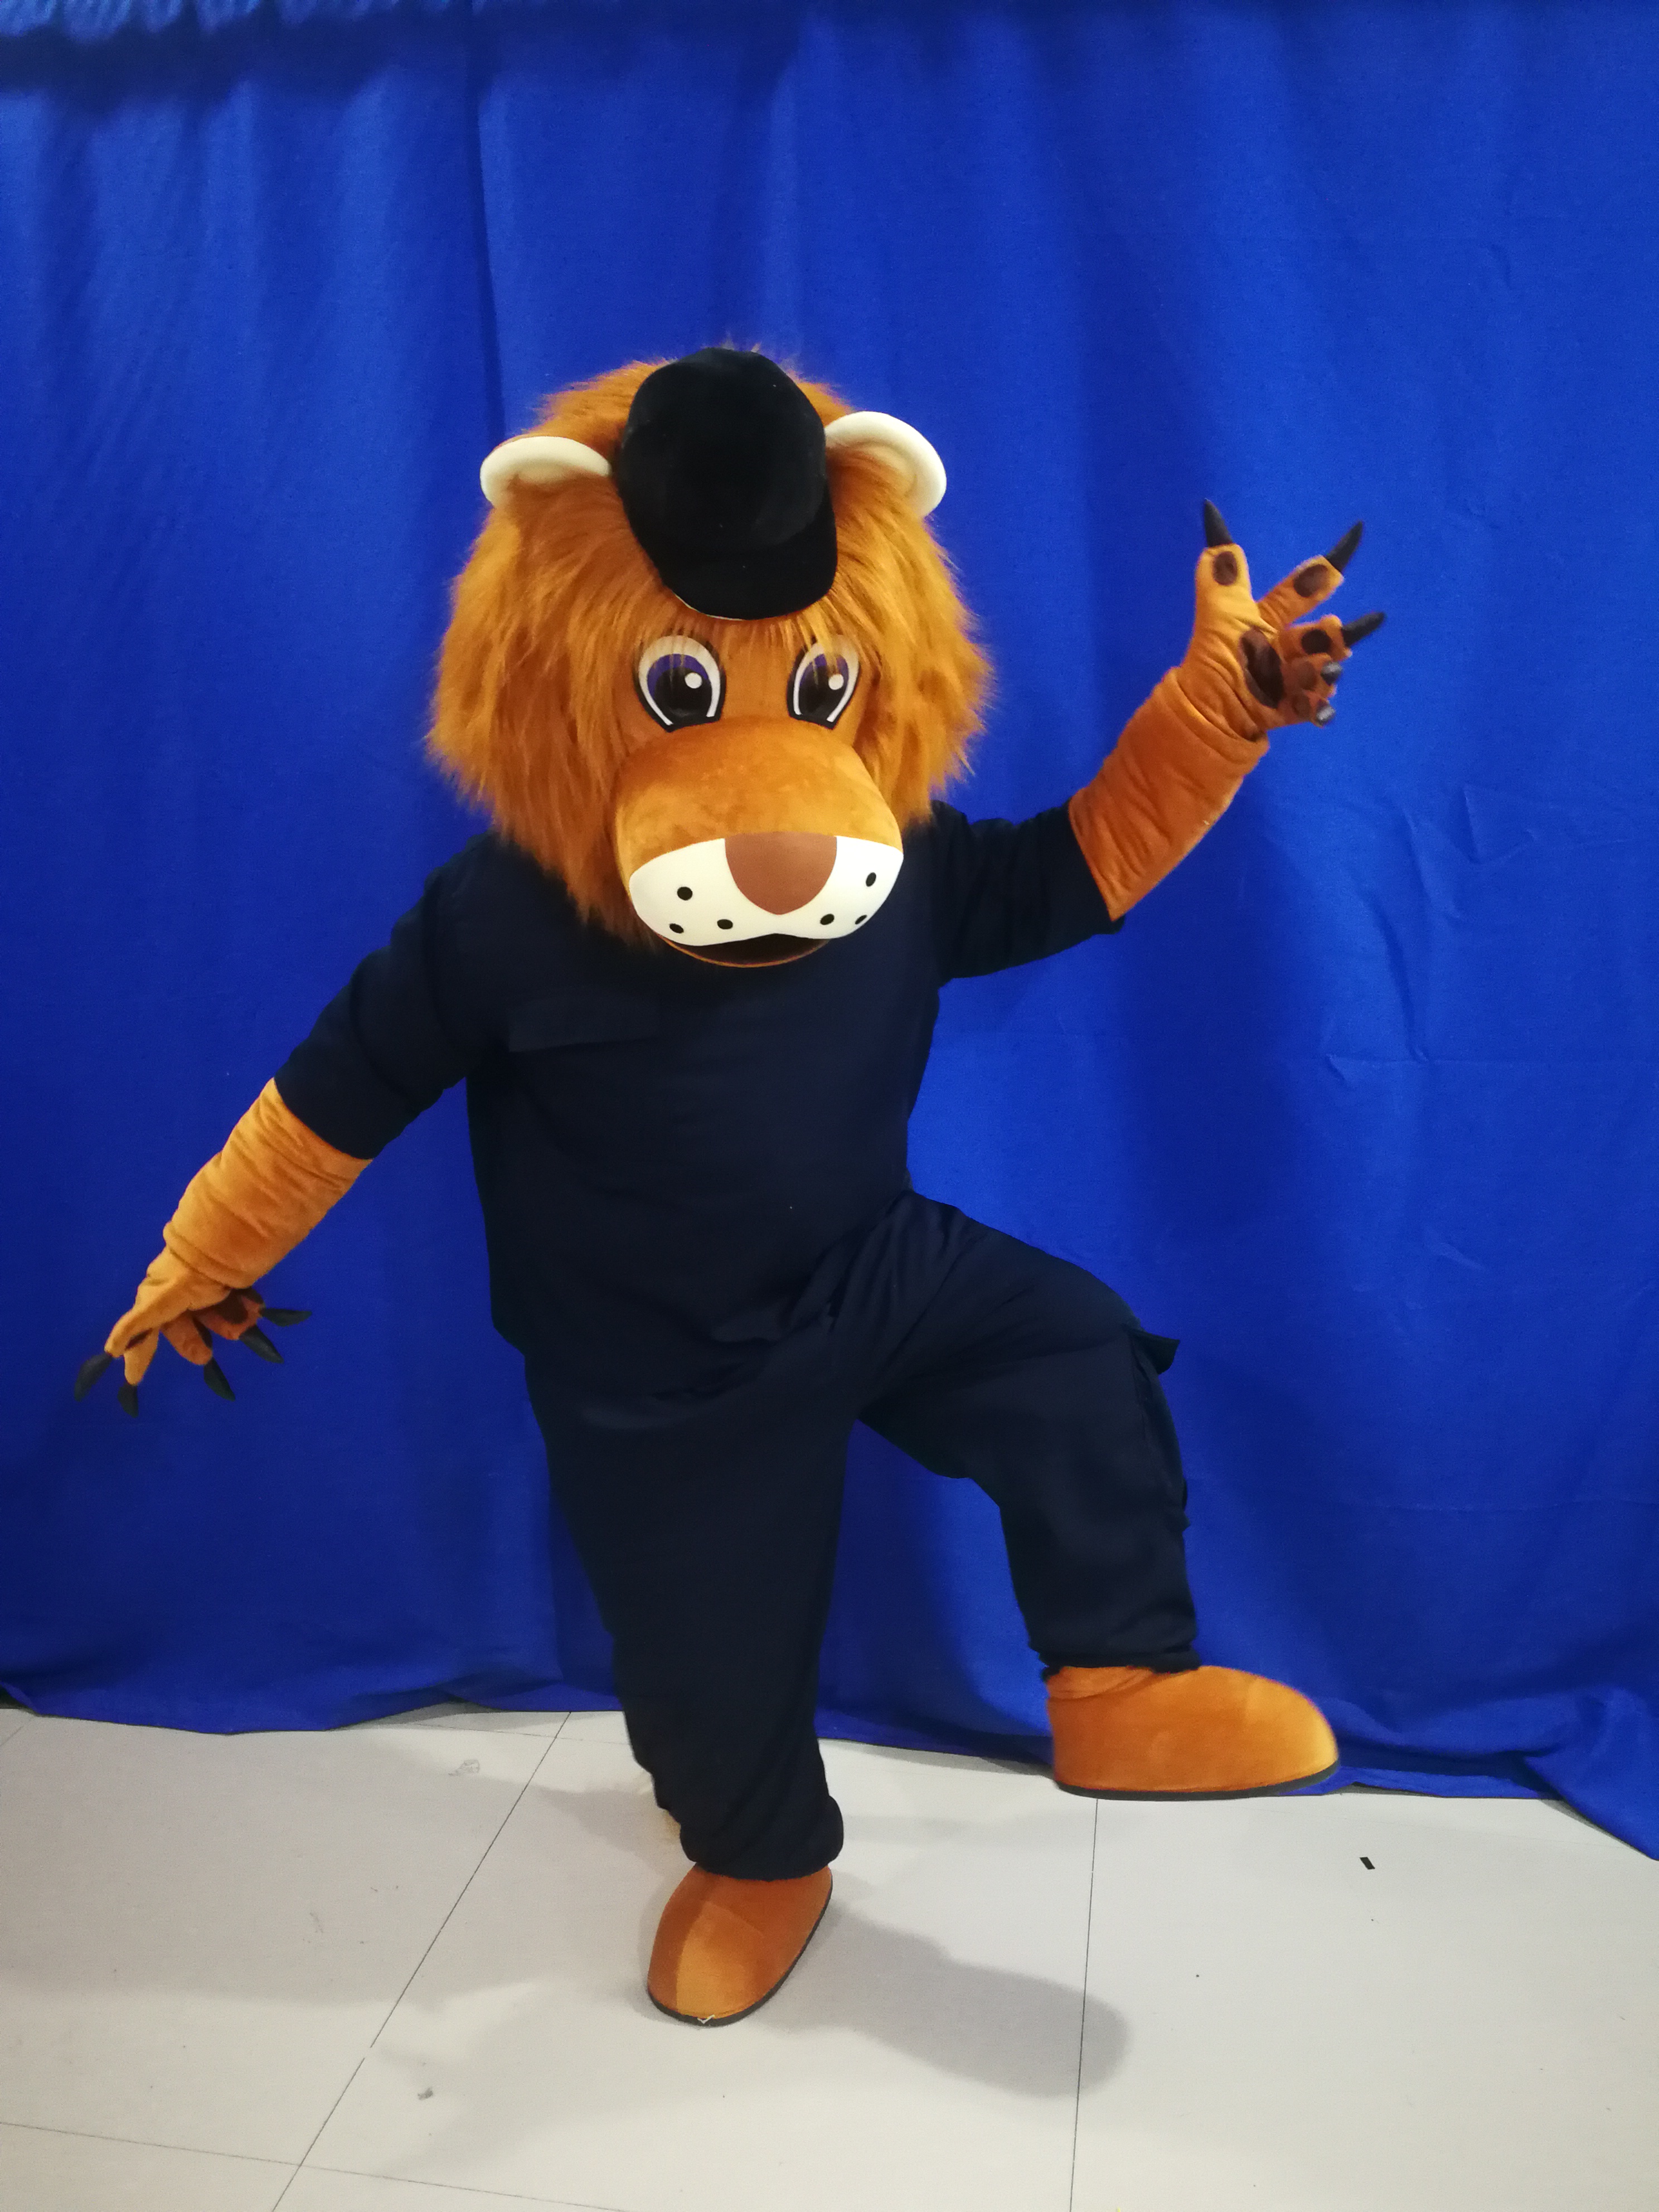 Real Pictures Wear T-shirt shorts lion mascot Costume Party Cartoon Character Costumes for Sale Adult Size factory direct support customization